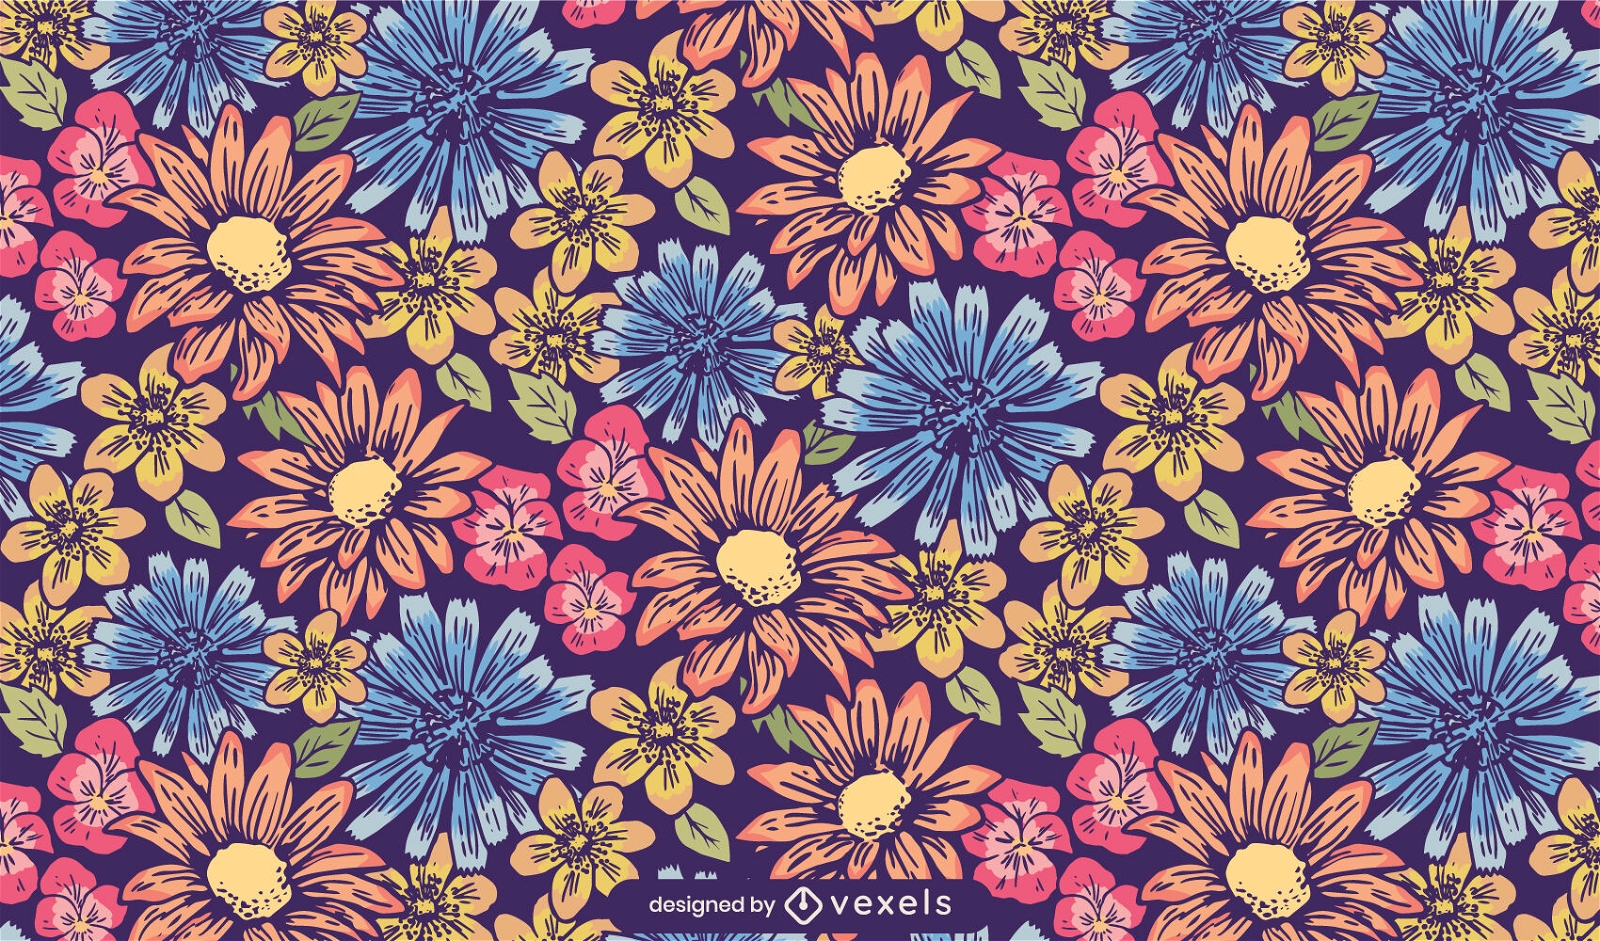 Colorful flowers nature pattern design